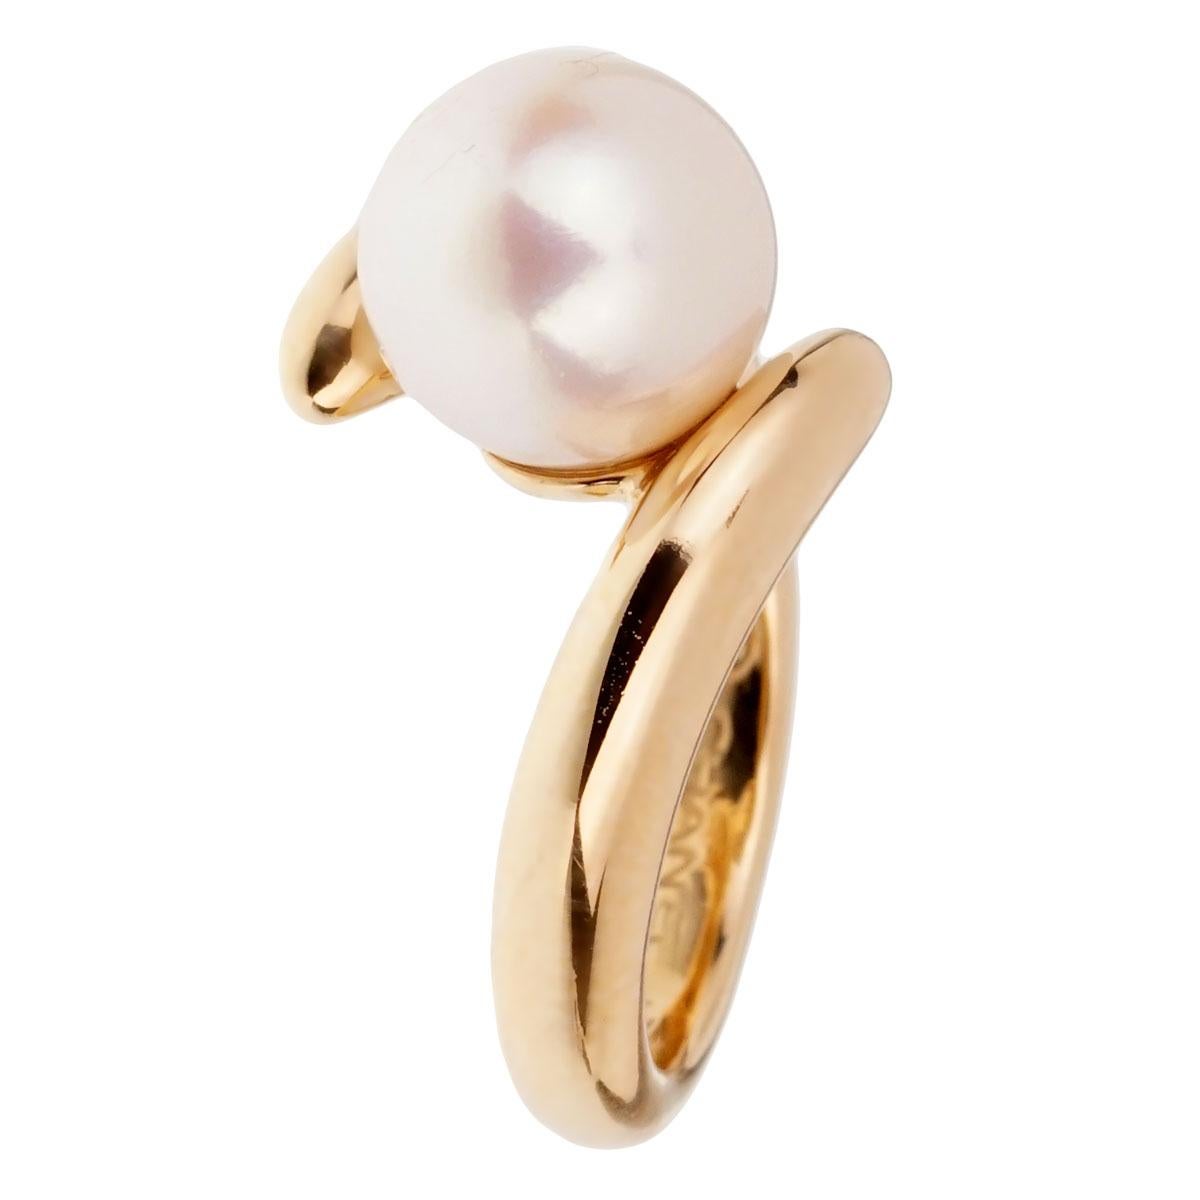 A chic bypass ring by Chanel crafted in 18k yellow gold.

Size 4 1/2 (Resizeable)